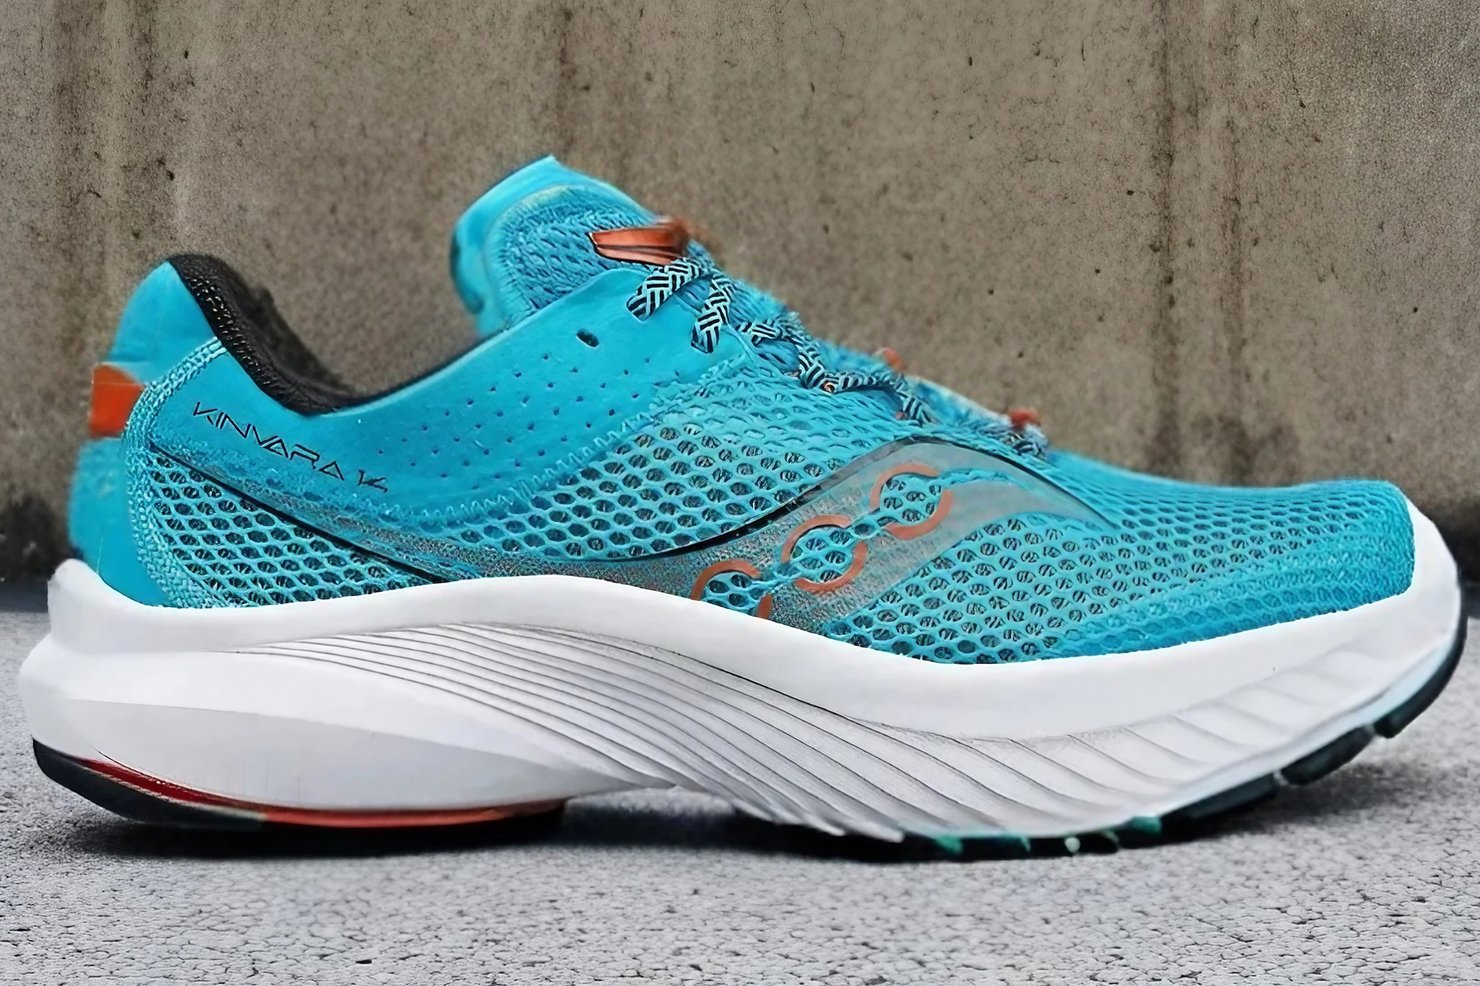 The Saucony Kinvara 14 in front of a rock wall.